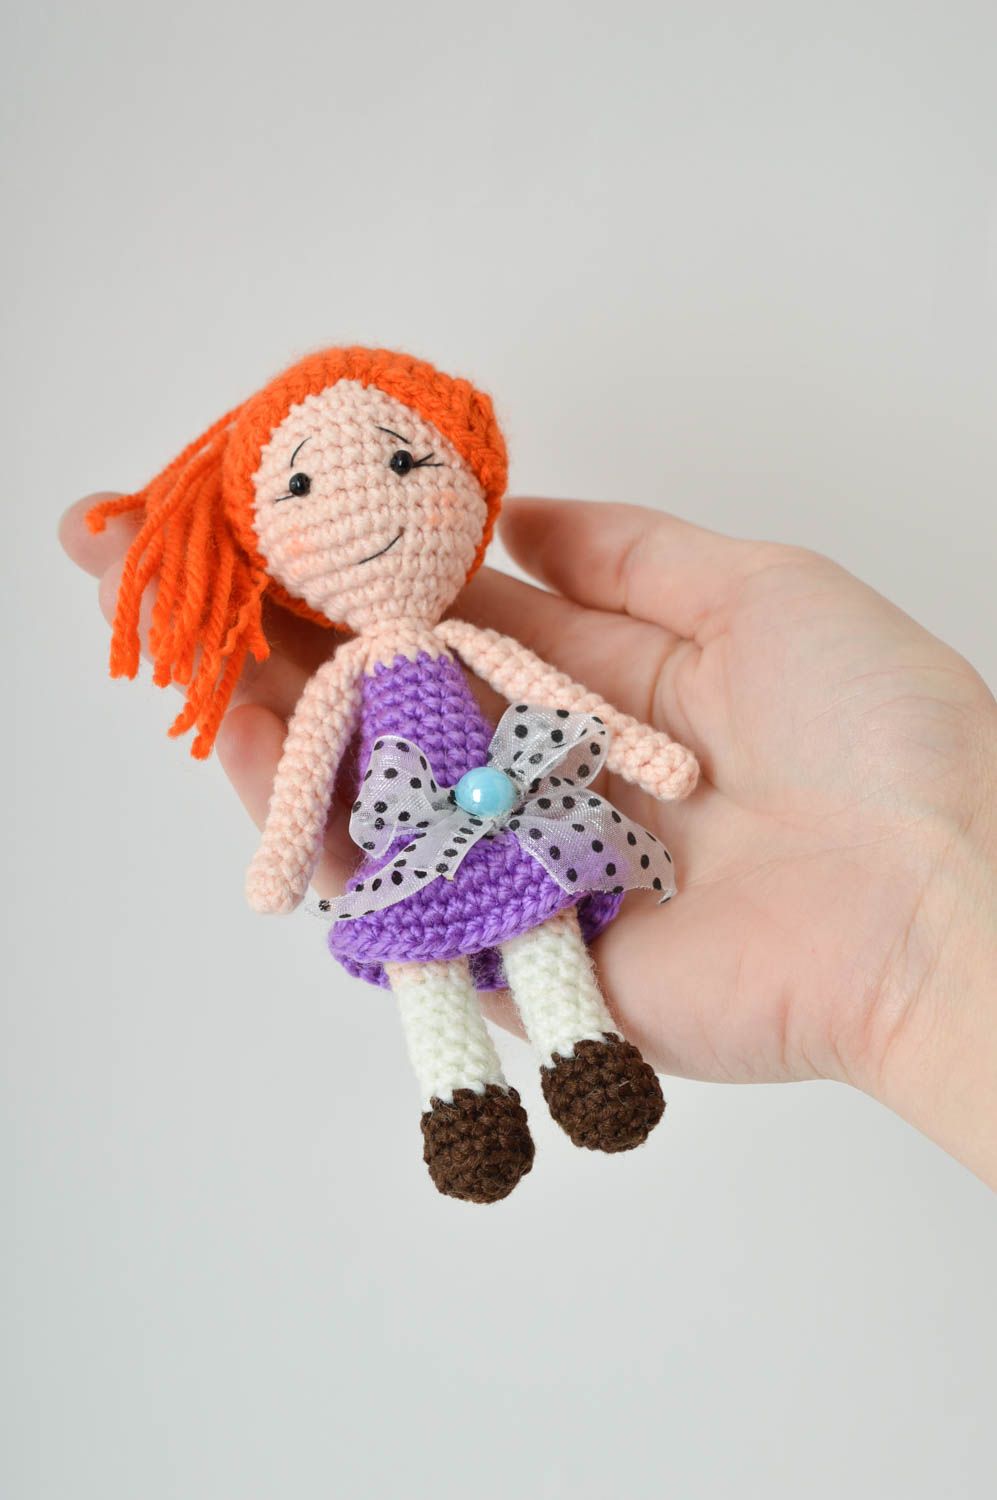 Baby doll handmade crocheted toy for children stuffed toys hand-crocheted toys photo 5